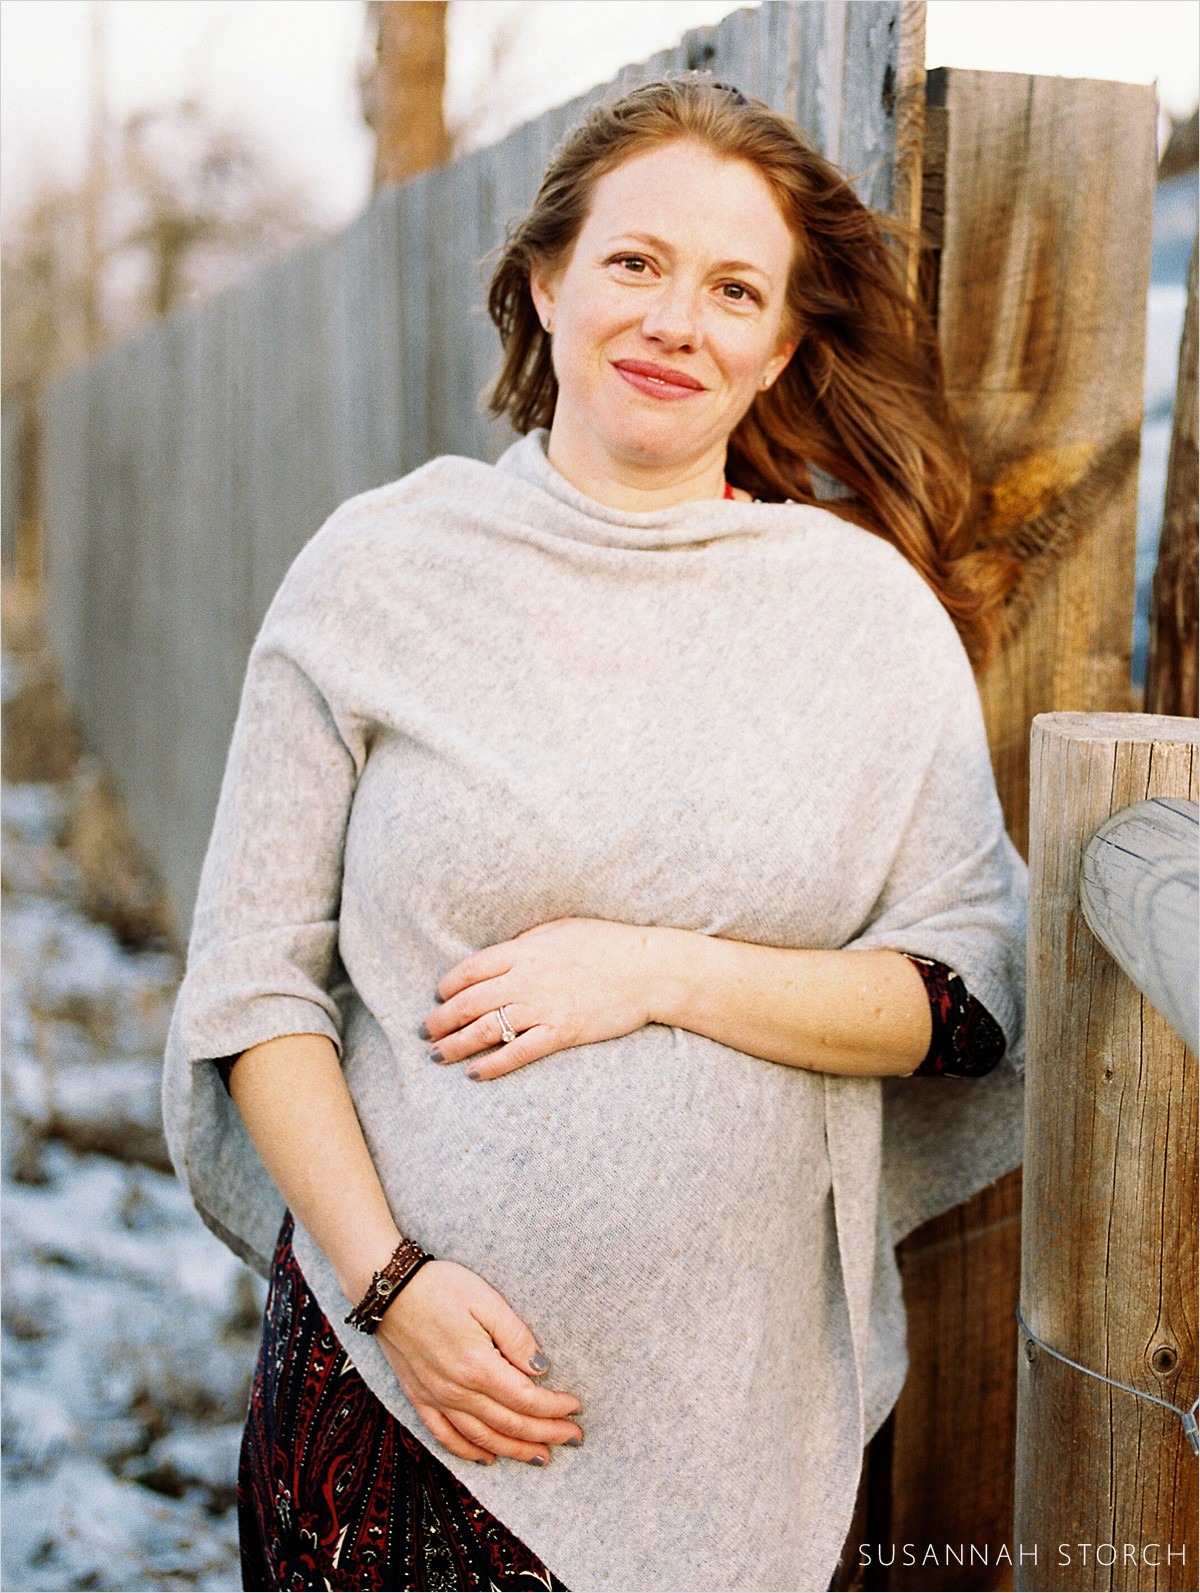 pregnant woman with gray shawl and red hair smiles